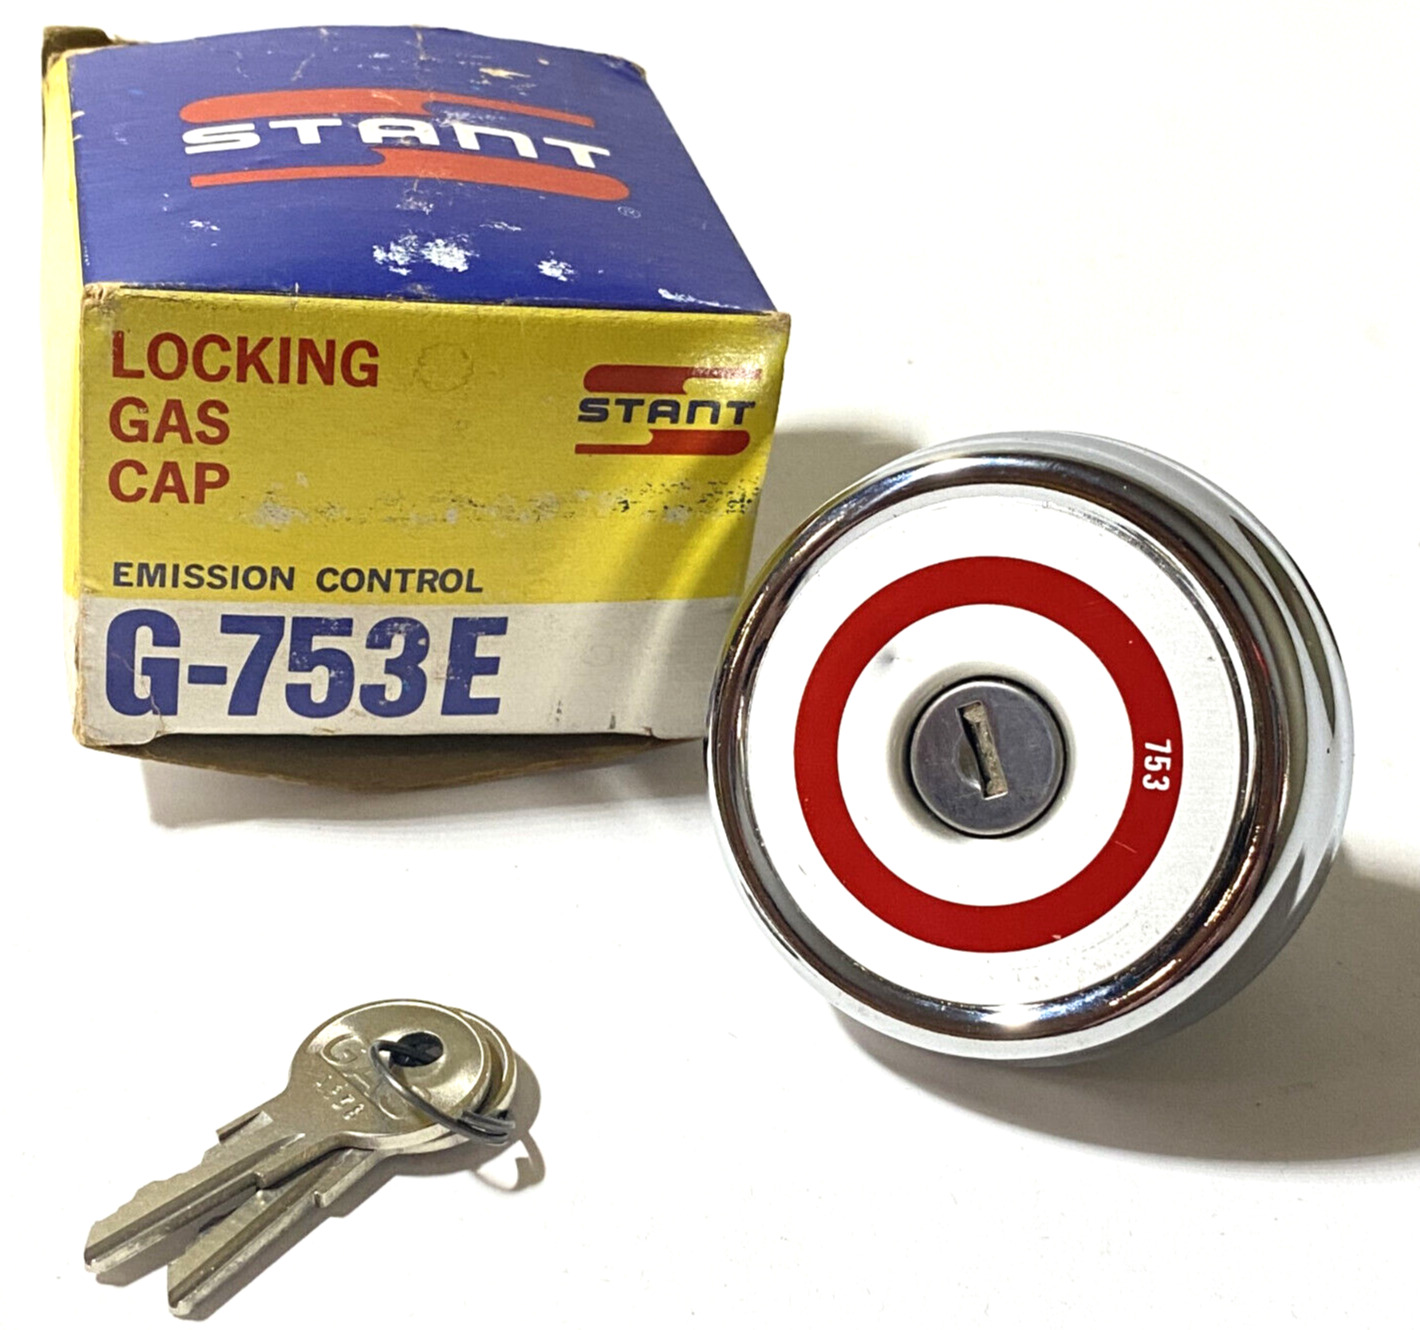 VINTAGE STANT LOCKING GAS CAP G-753E WITH TWO KEYS  in Original Box Chrysler